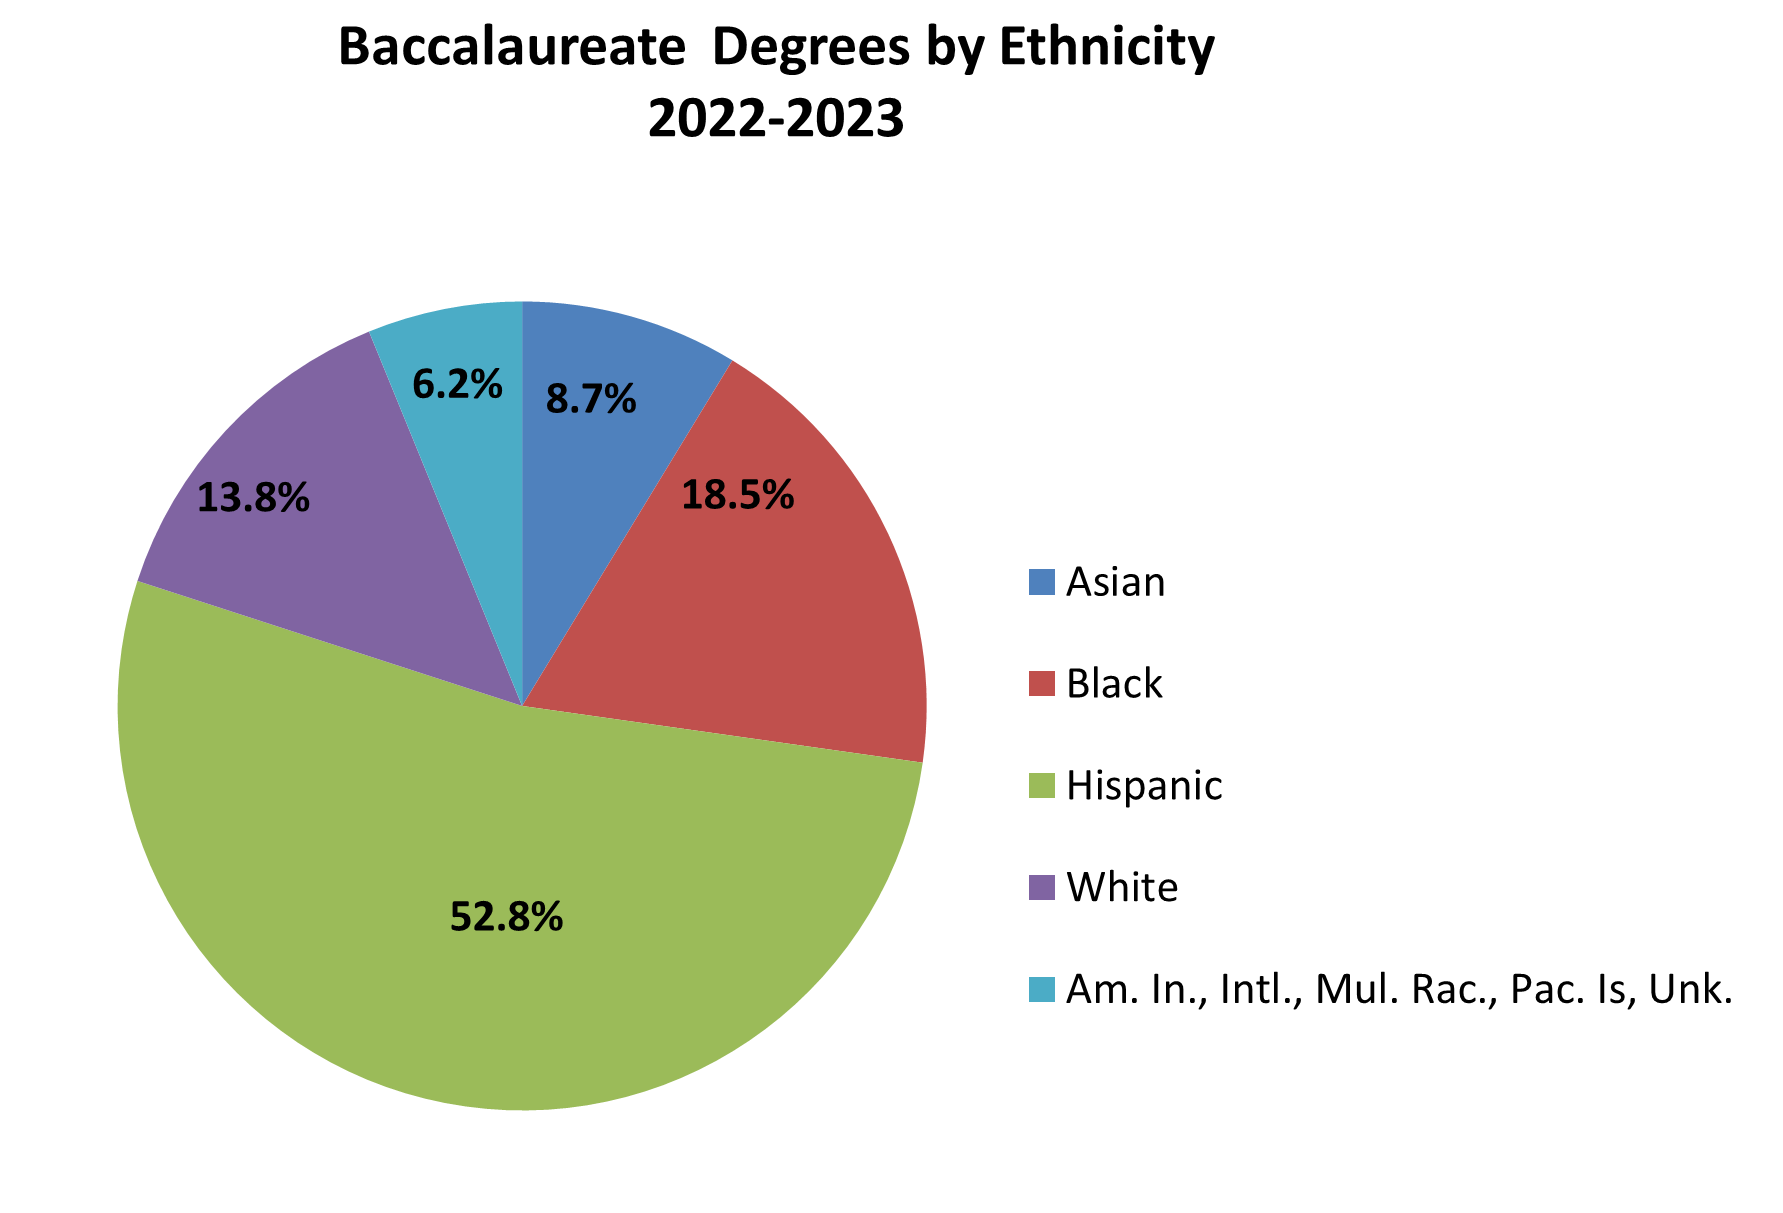 Baccalaureate Degrees by Ethnicity pie chart